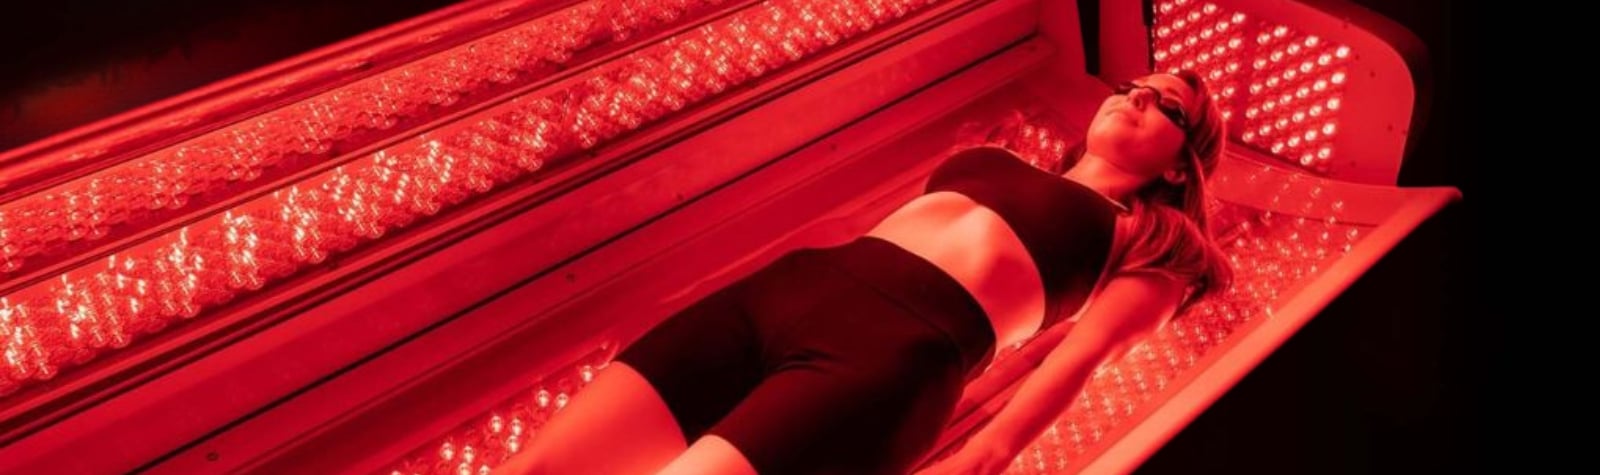 Top 11 Health Benefits Of Red Light Therapy